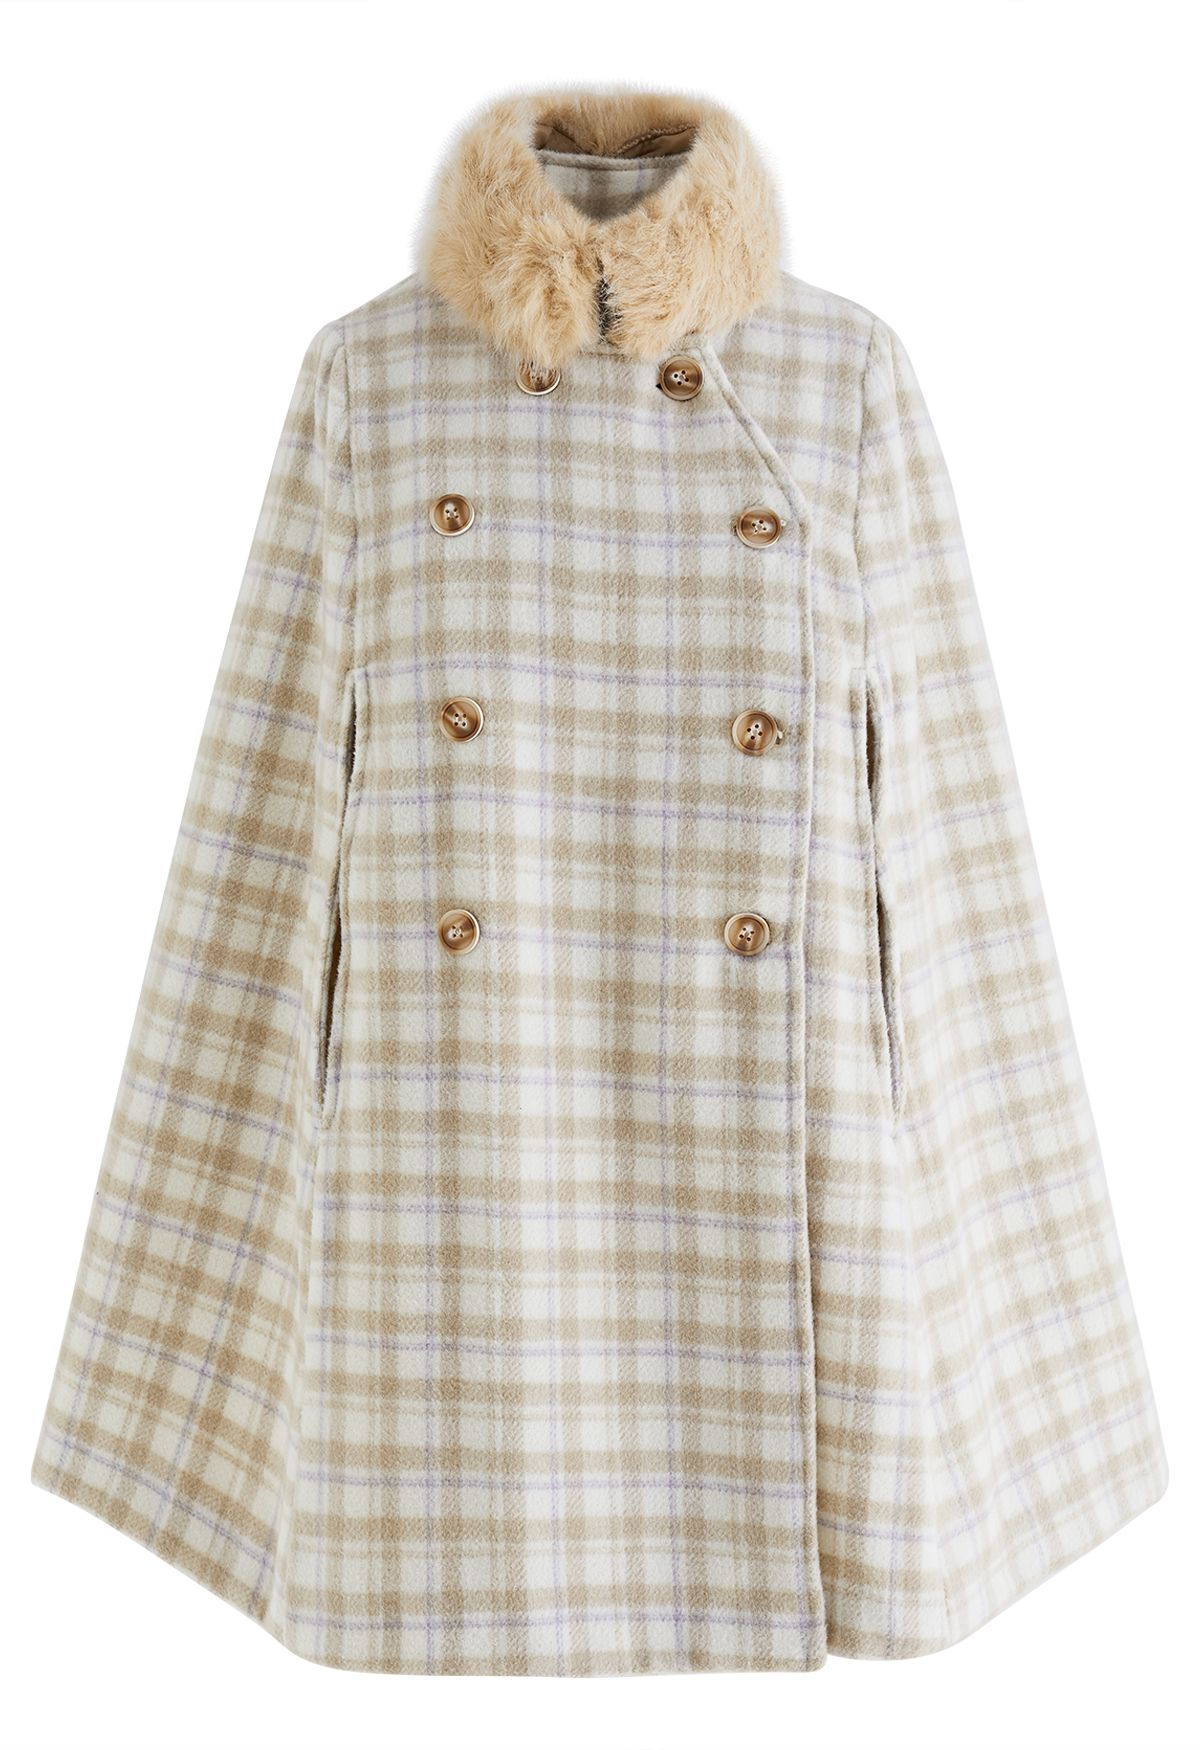 Plaid Faux Fur Collar Double-Breasted Cape Coat